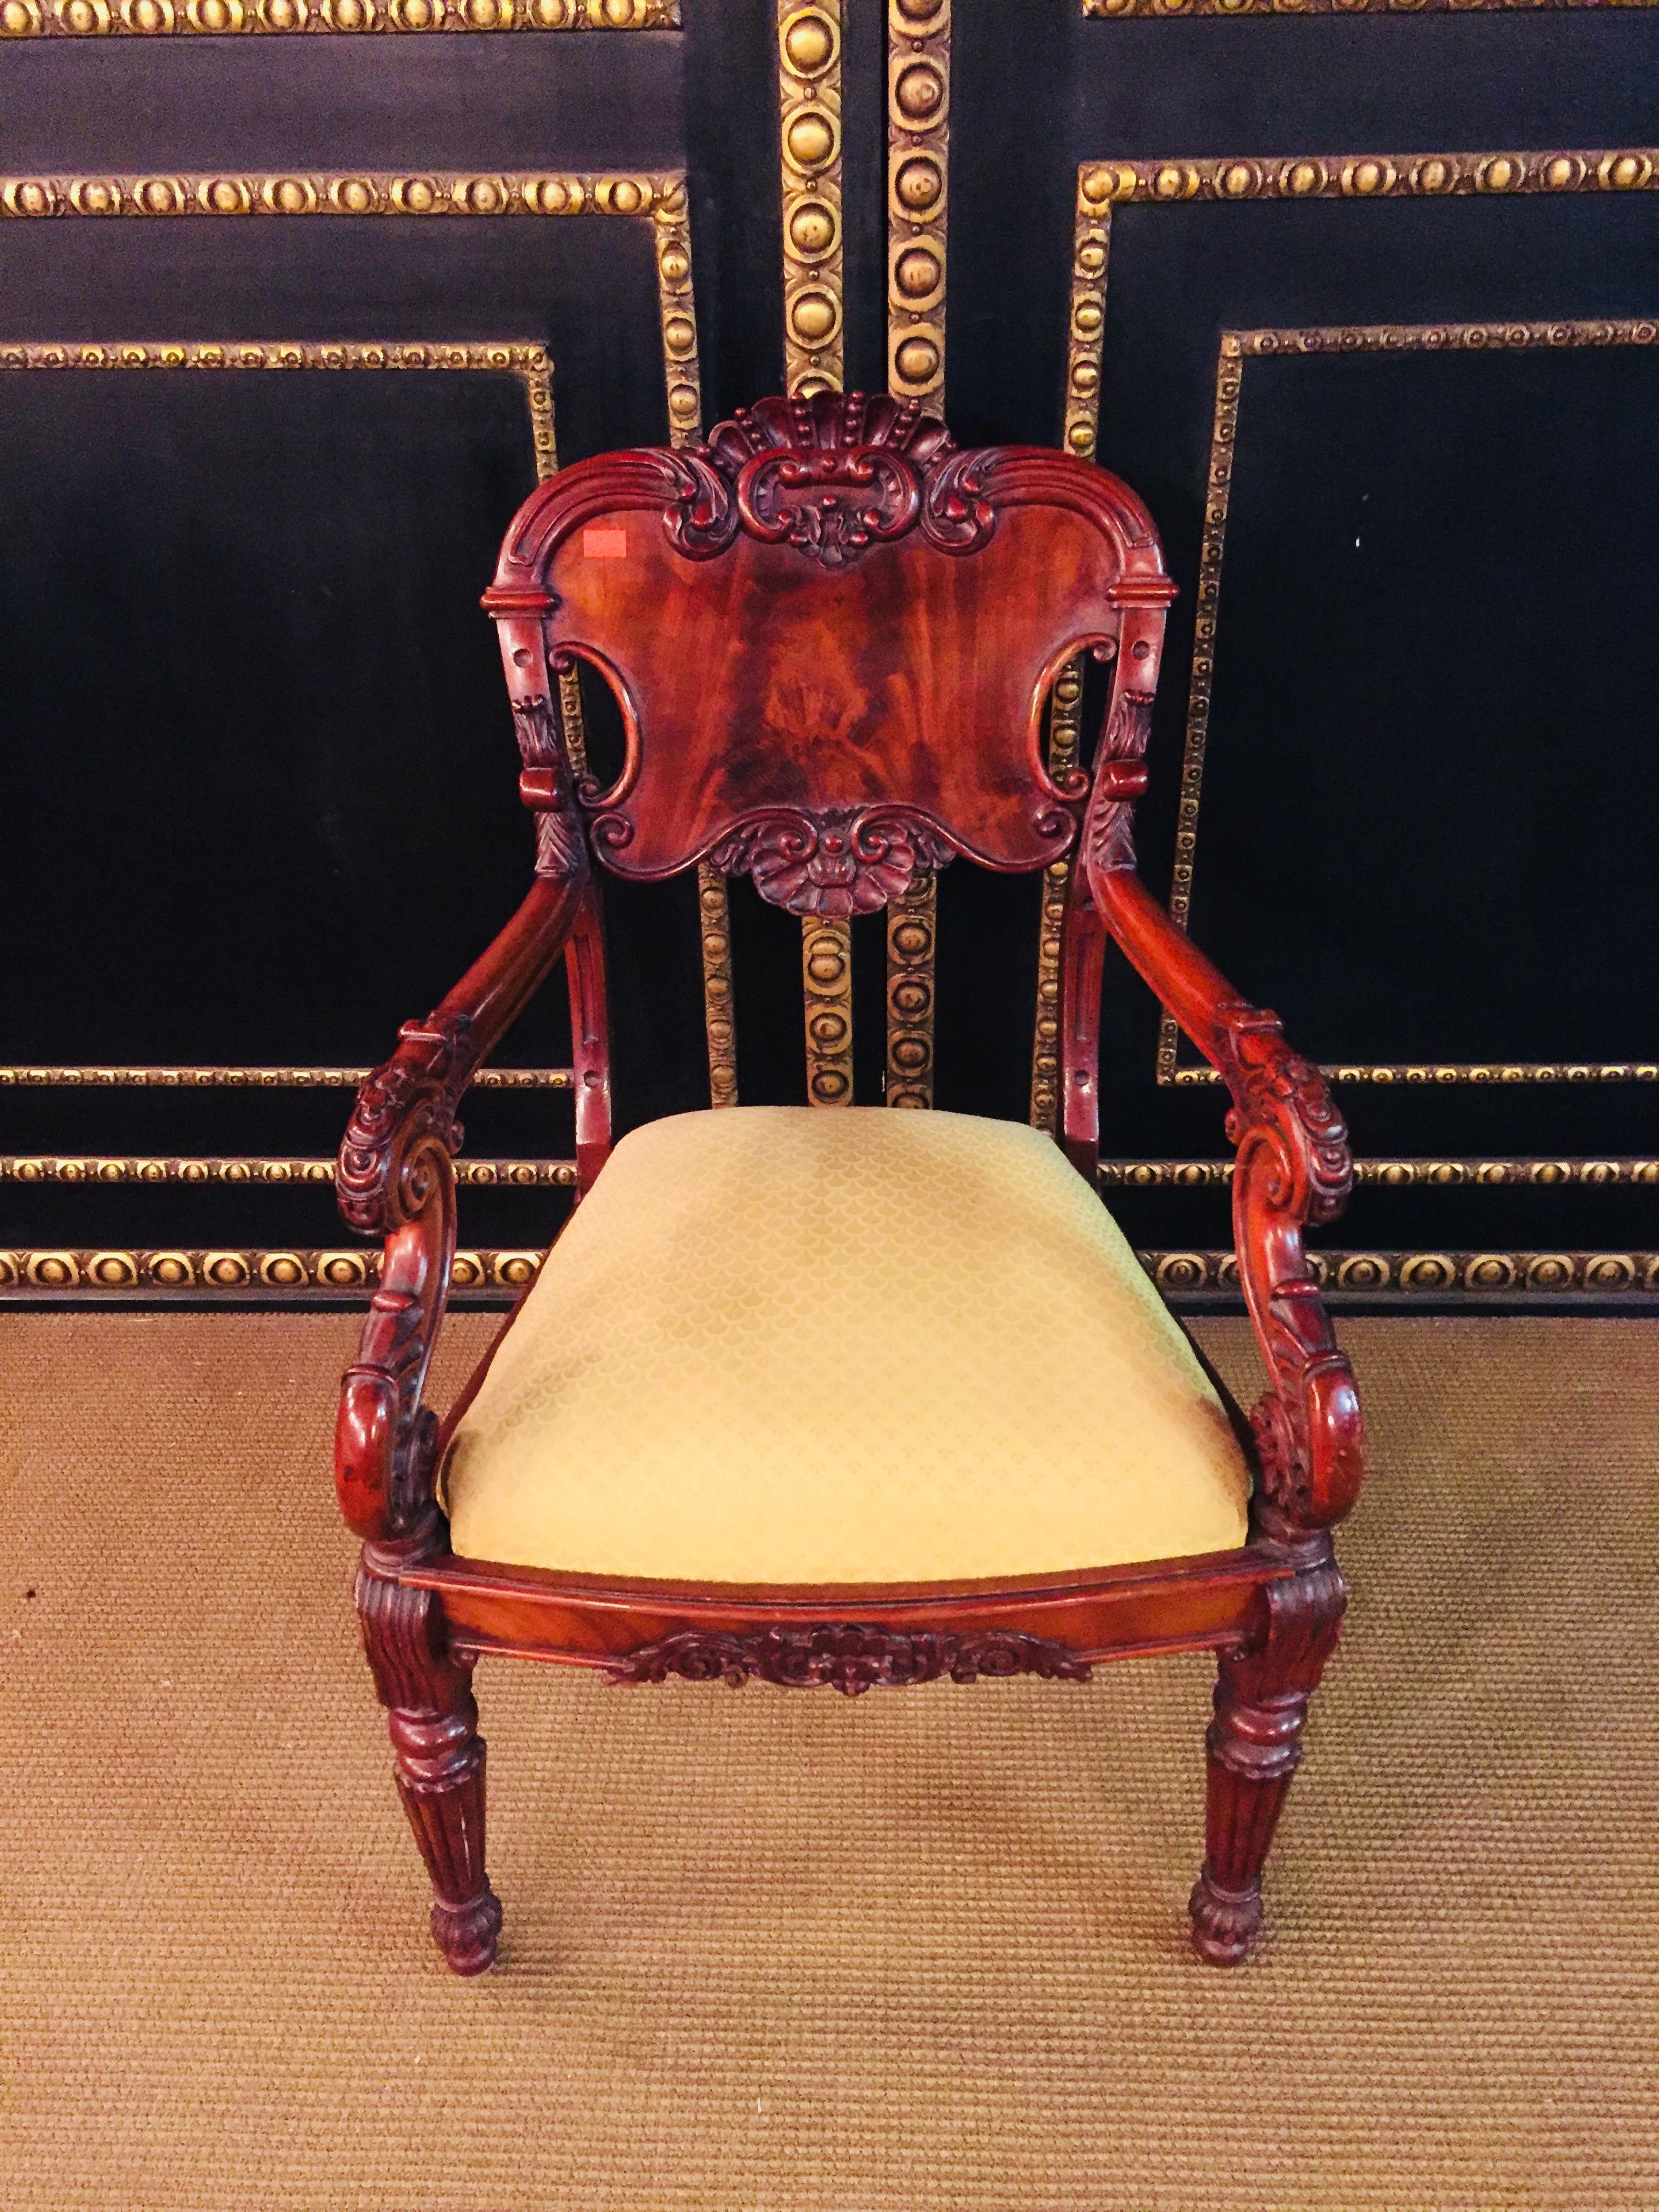 Hand-Crafted High-Quality Armchair, Russia circa 1830 Solid Mahogany